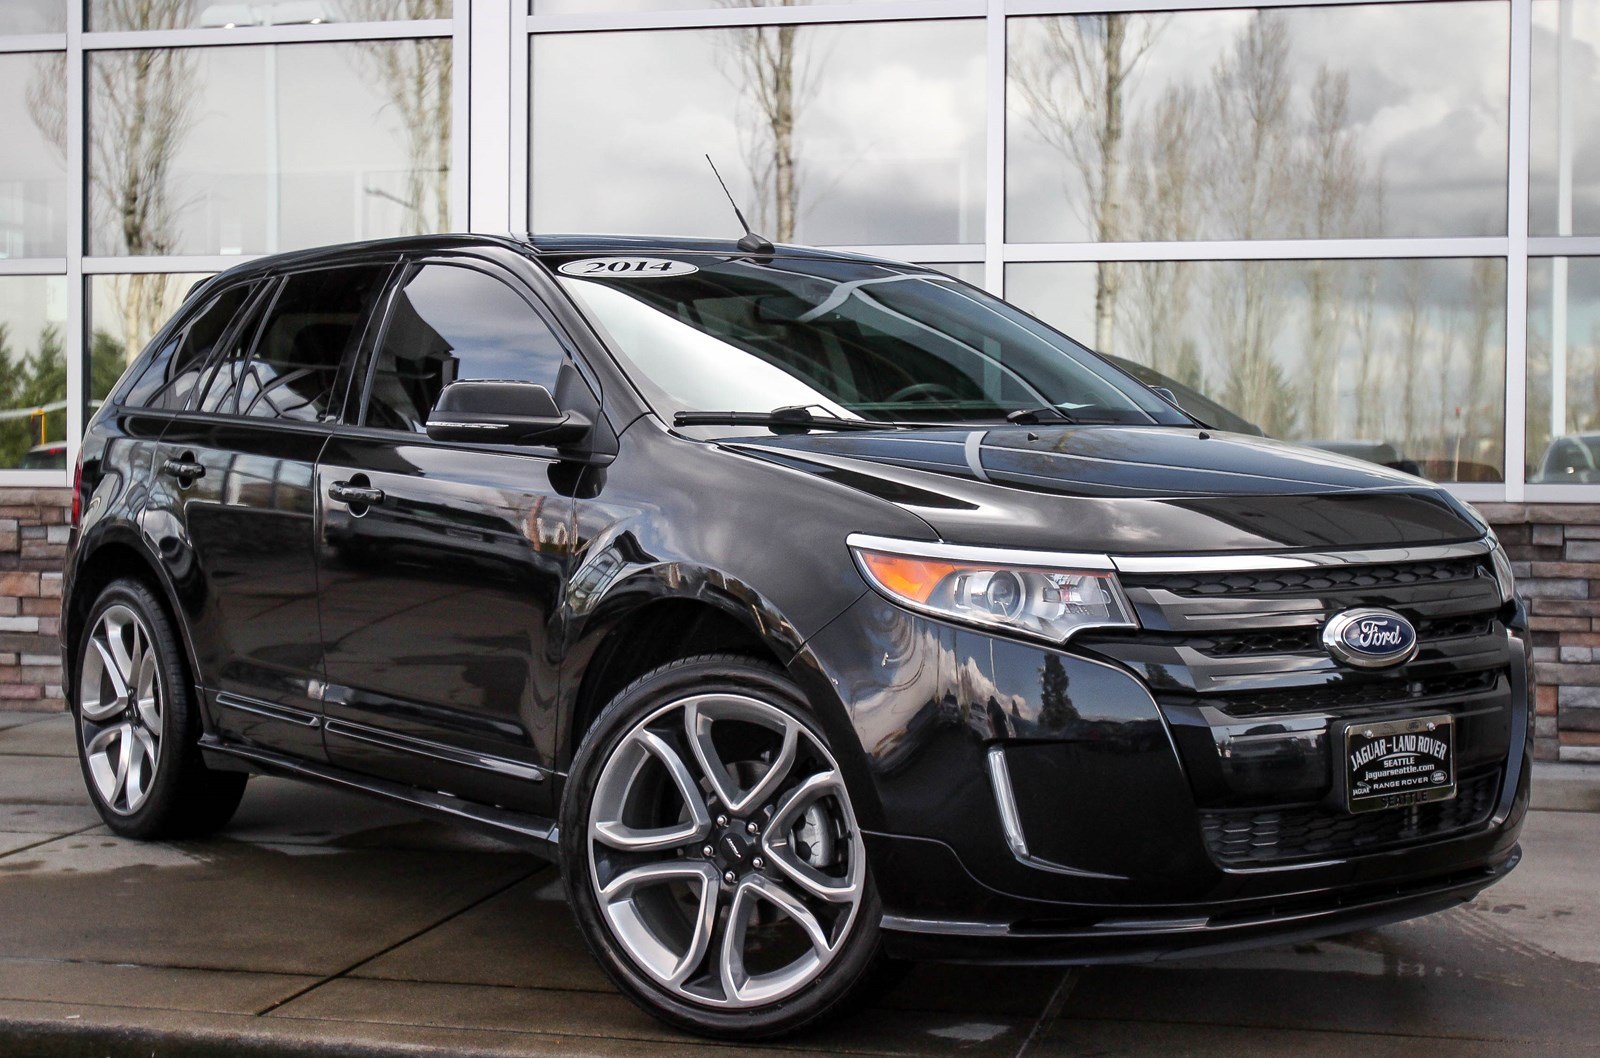 Pre-Owned 2014 Ford Edge Sport Sport Utility in Lynnwood #59834A